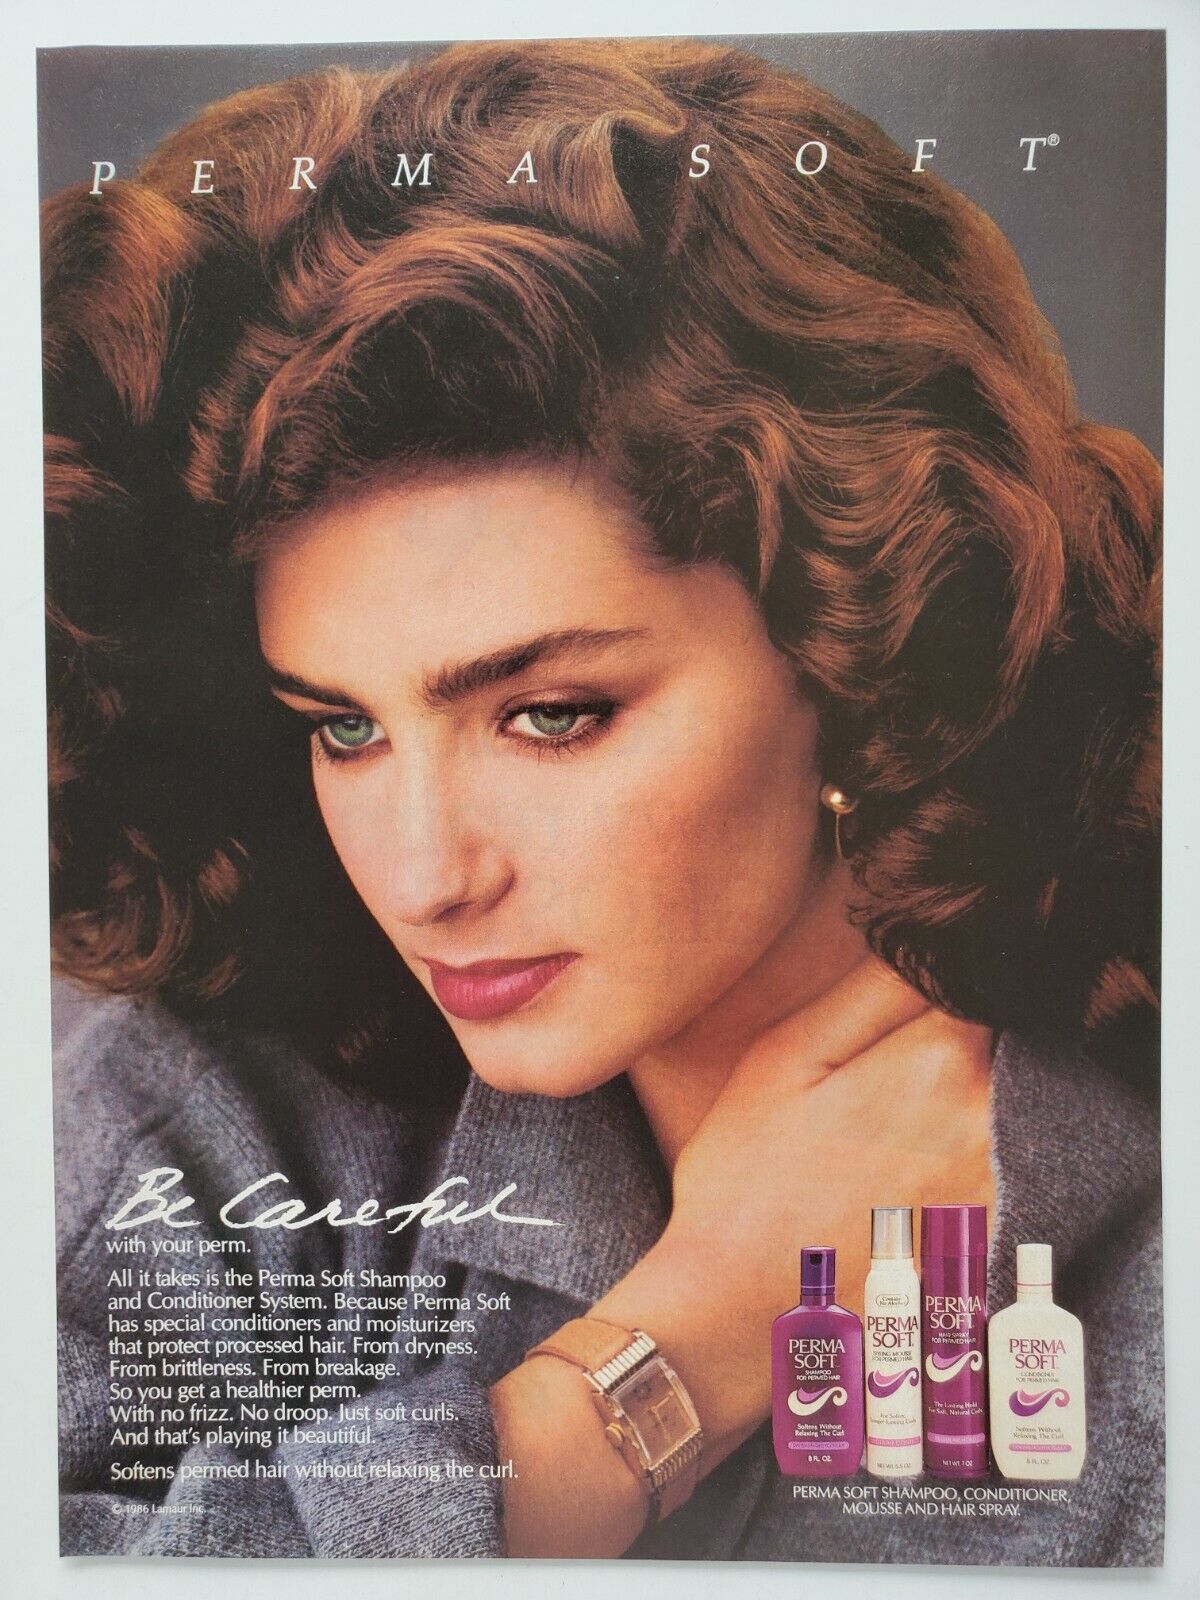 Perma Soft Womens Hair Care Products Lovely Brunette Model 1986 Vintage Print Ad